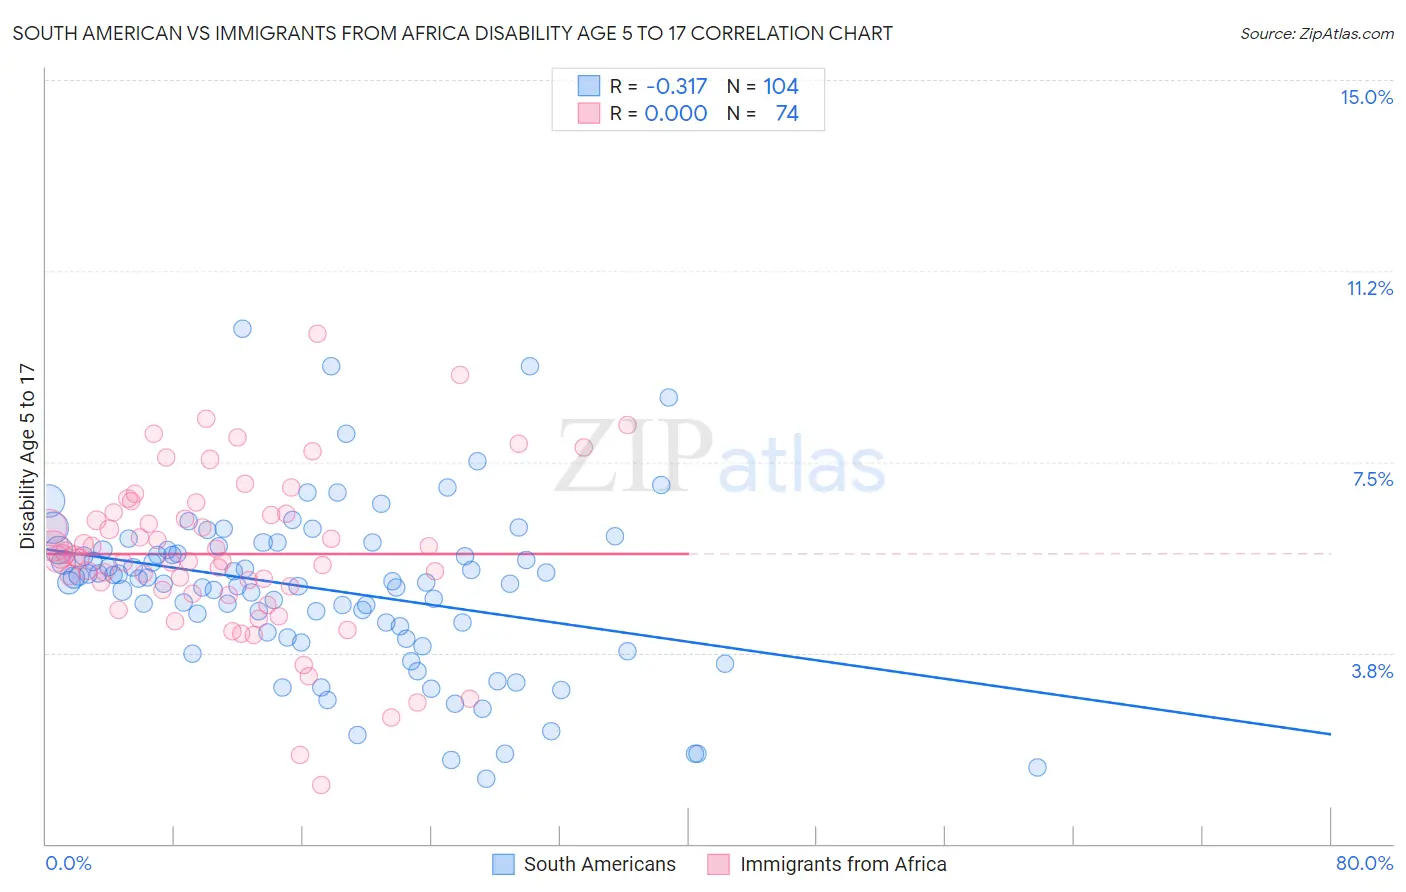 South American vs Immigrants from Africa Disability Age 5 to 17